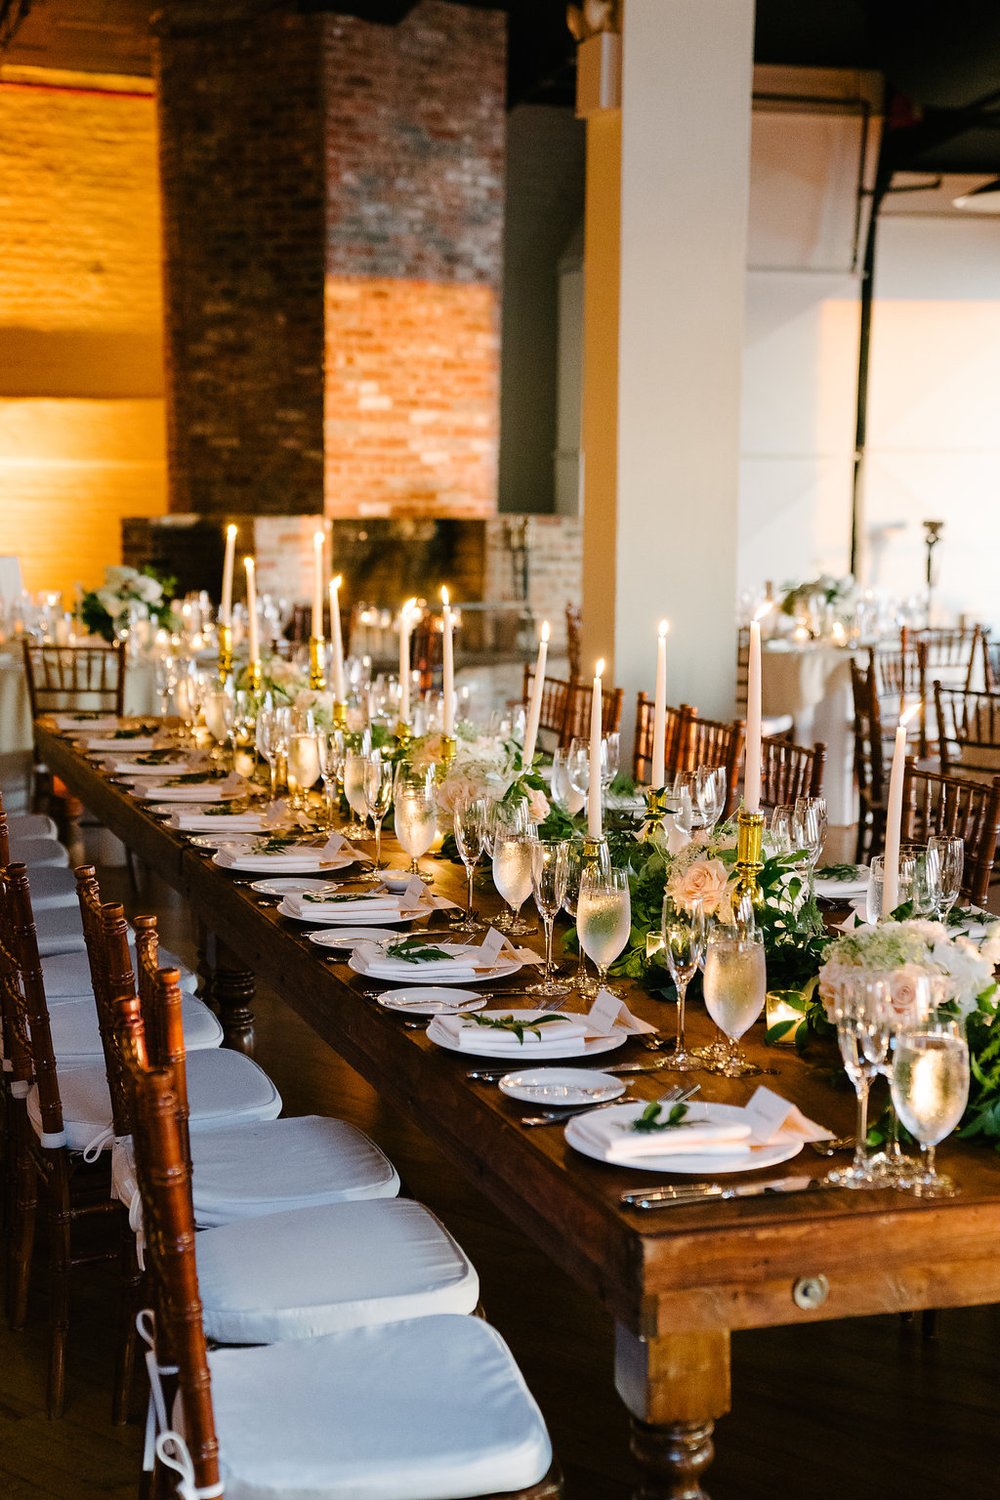 Rustic dinner tablescape on a wooden table with white and green flowers along the center with candlesticks throughout.